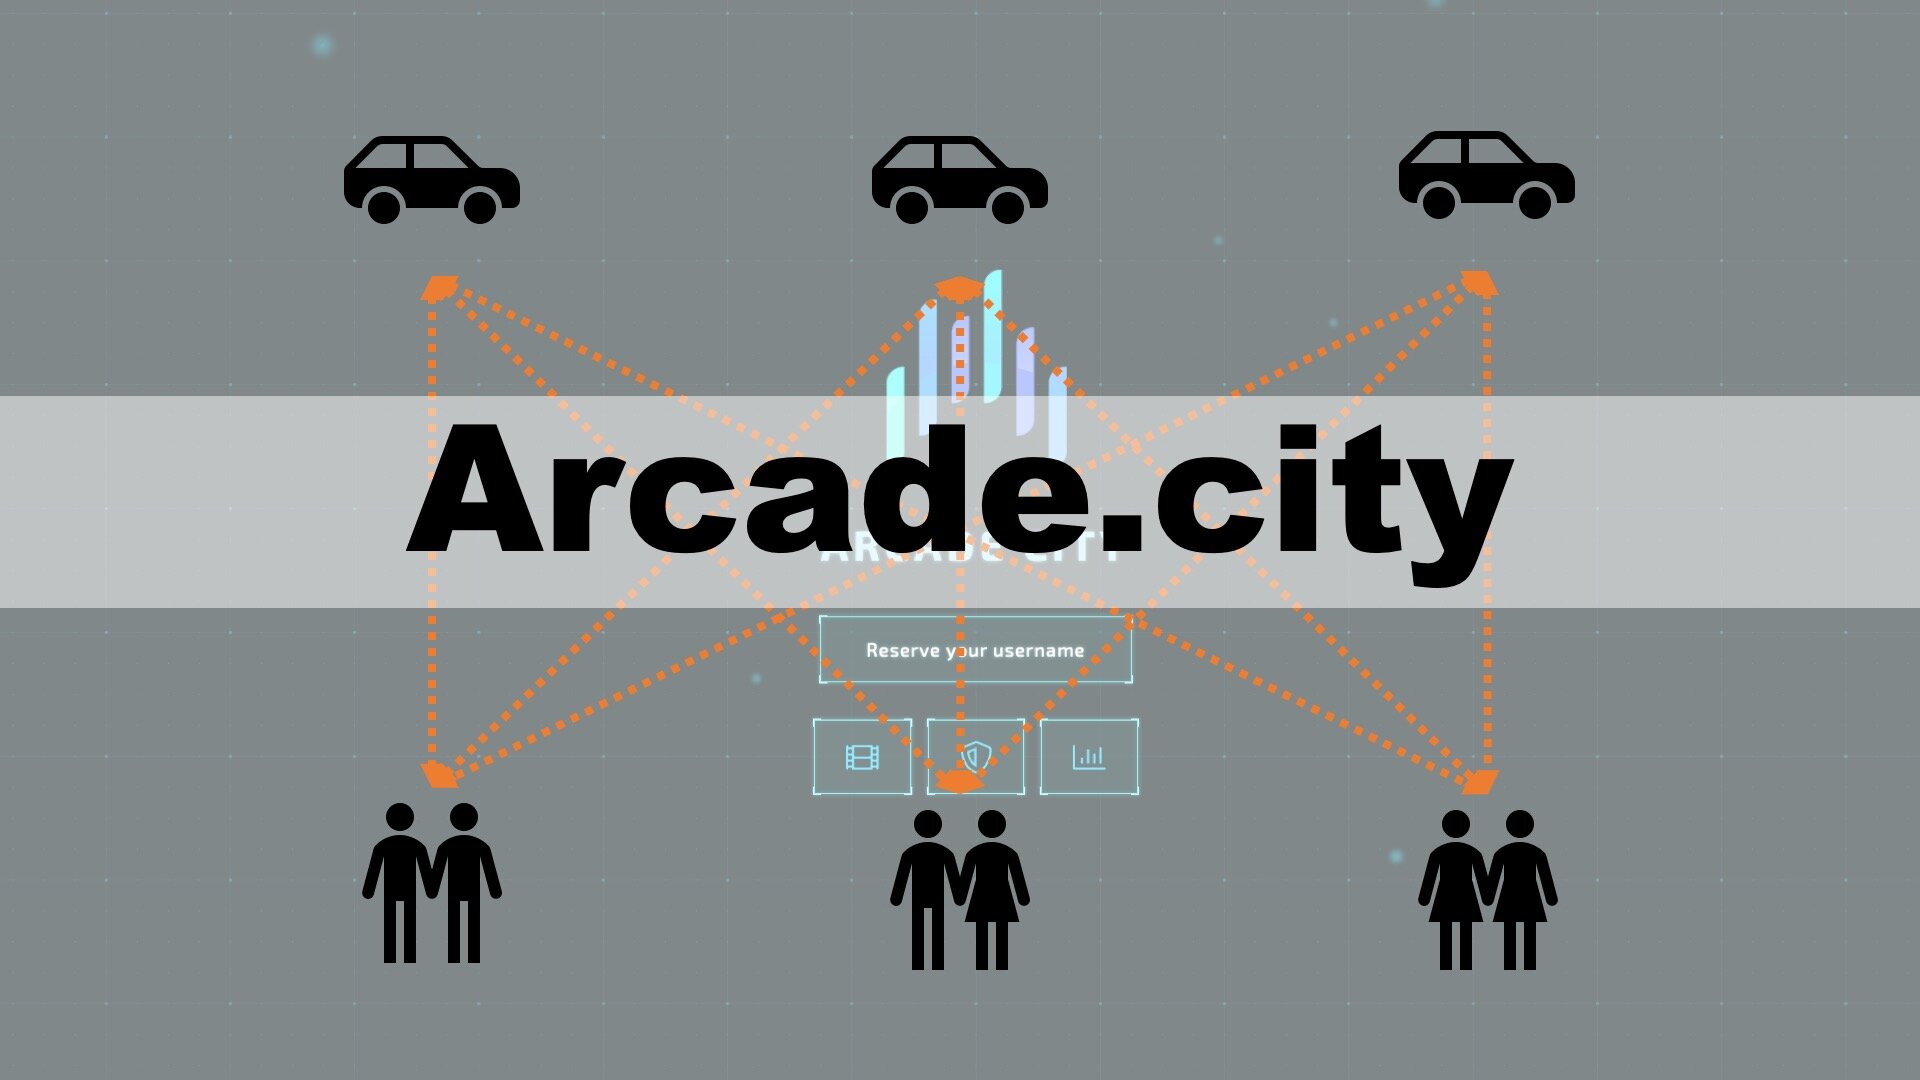 Arcade City. A truly P2P Taxi Service, soon in a town near you?